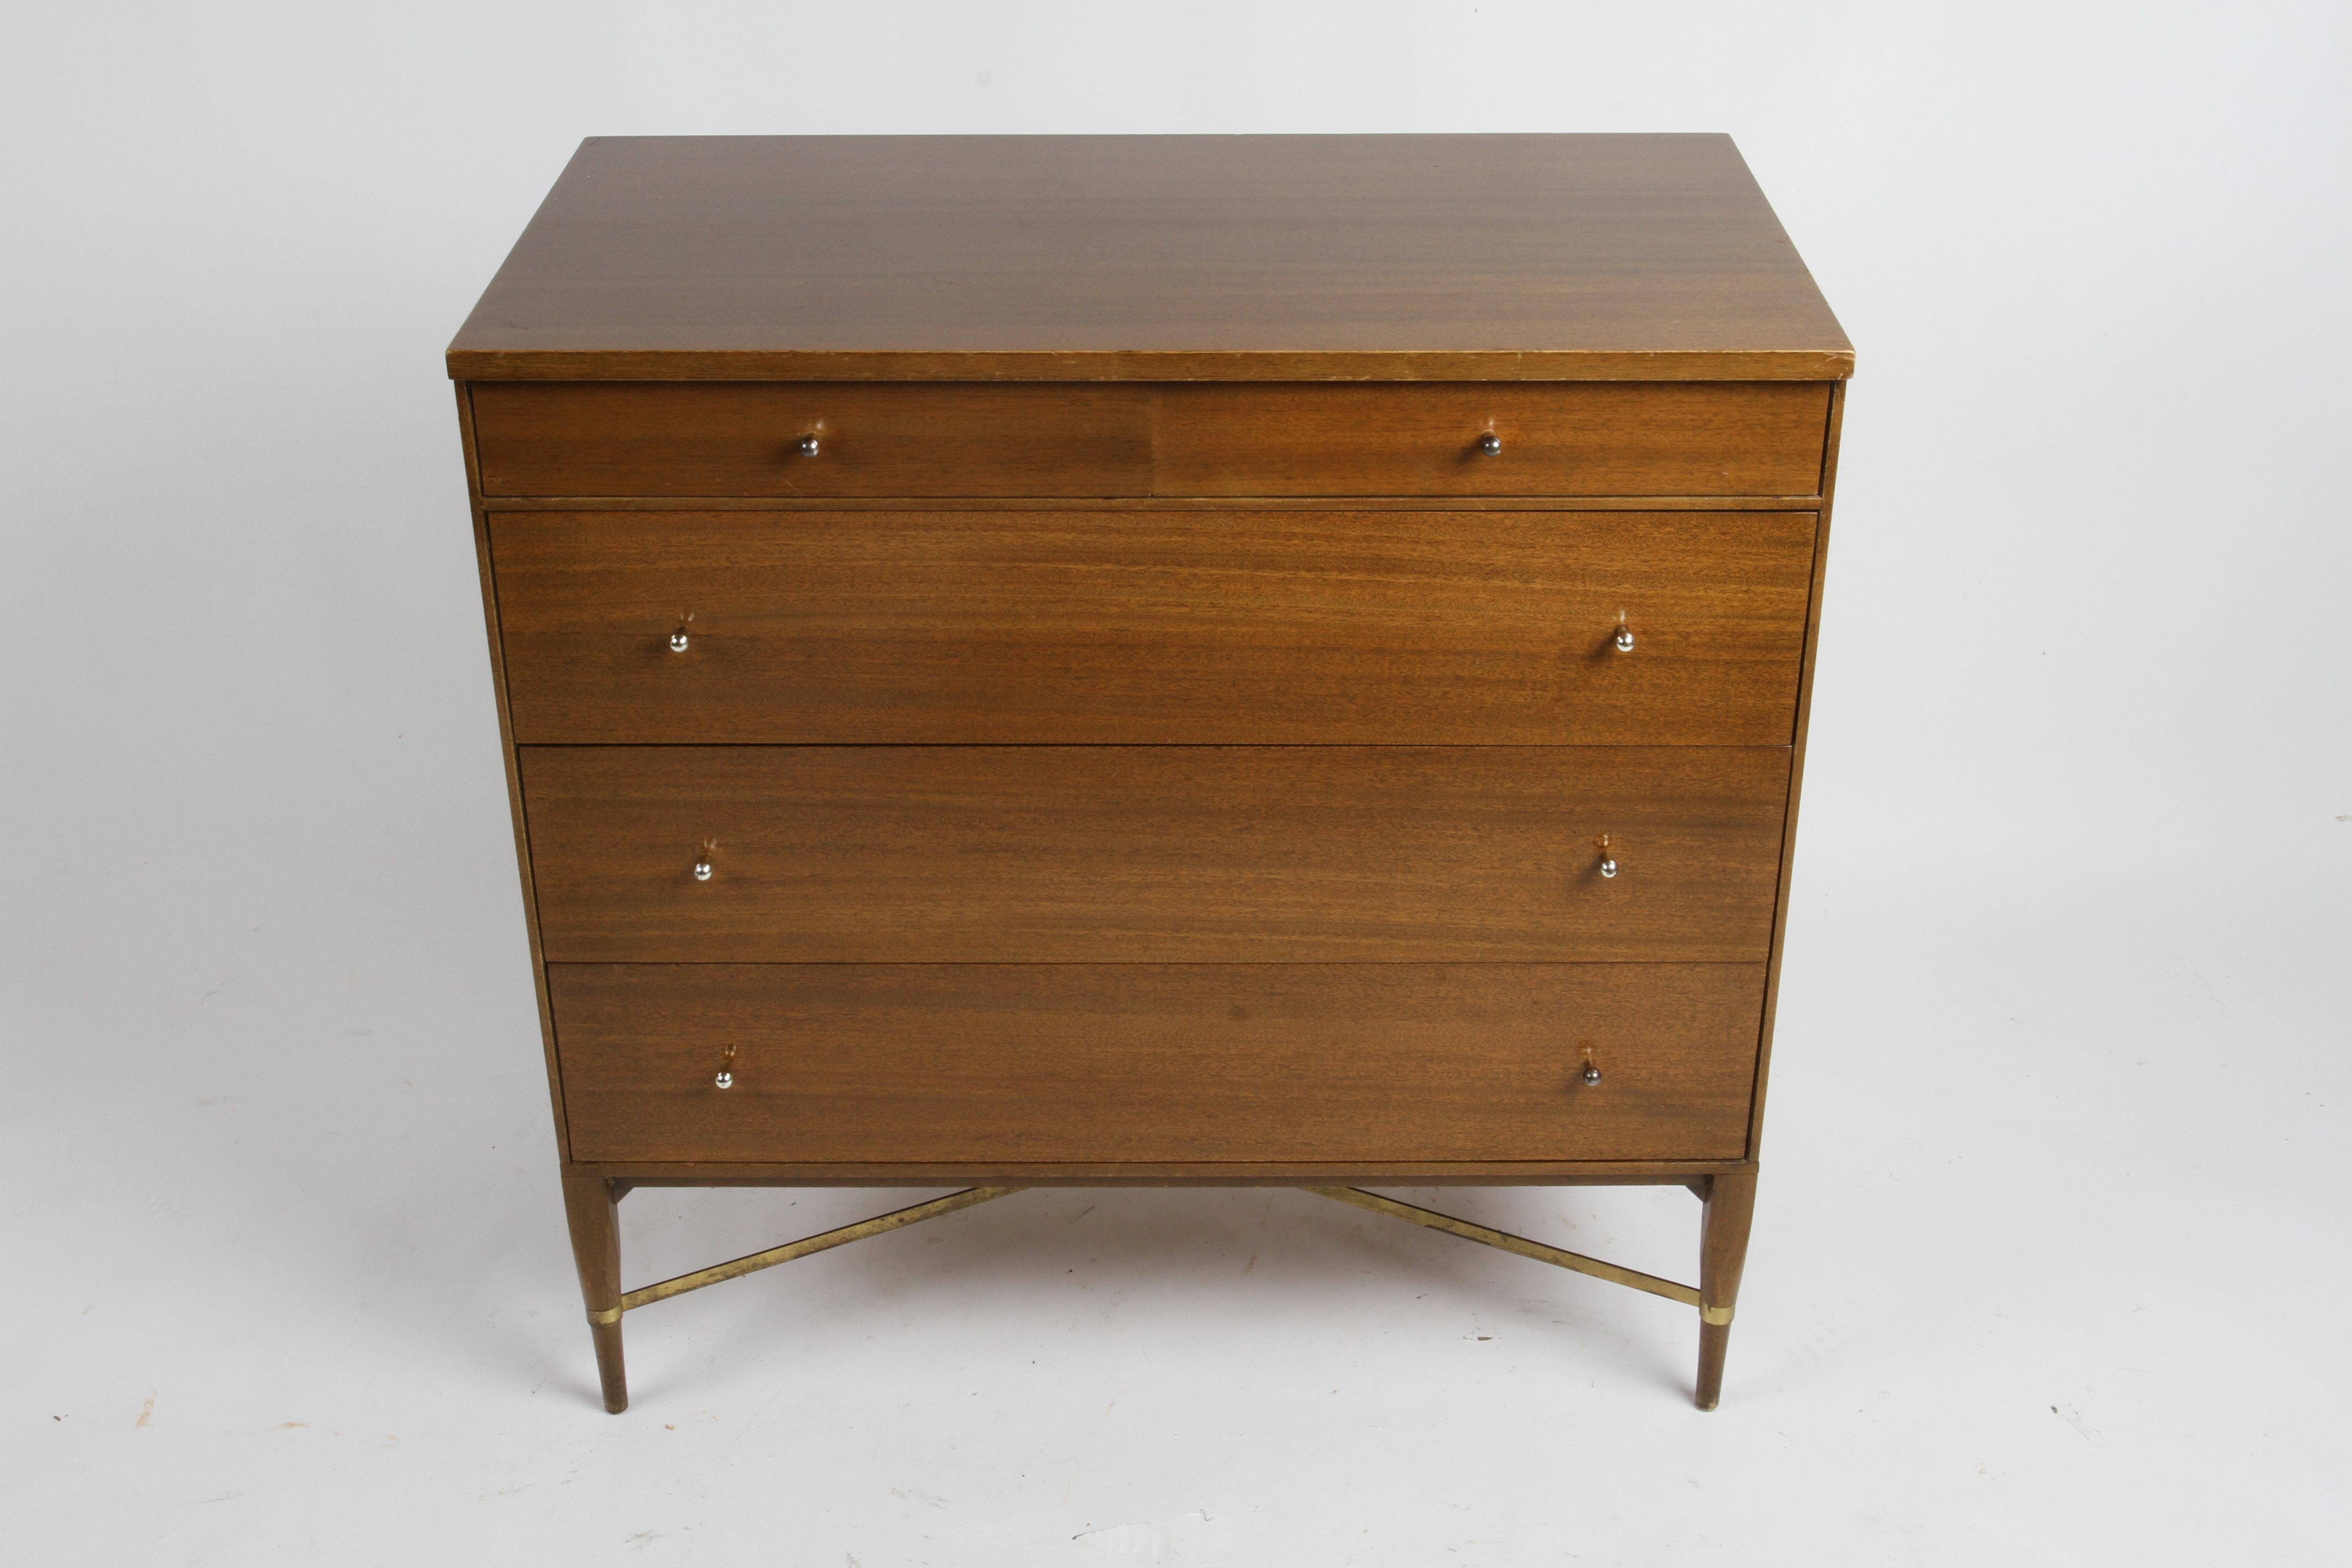 A very nicely tailored medium dark mahogany Mid-Century chest designed by Paul McCobb for the Calvin Furniture Company. Having two smaller upper drawers and three larger lower drawers all with tear drop pulls. The bottom has a great X brushed brass